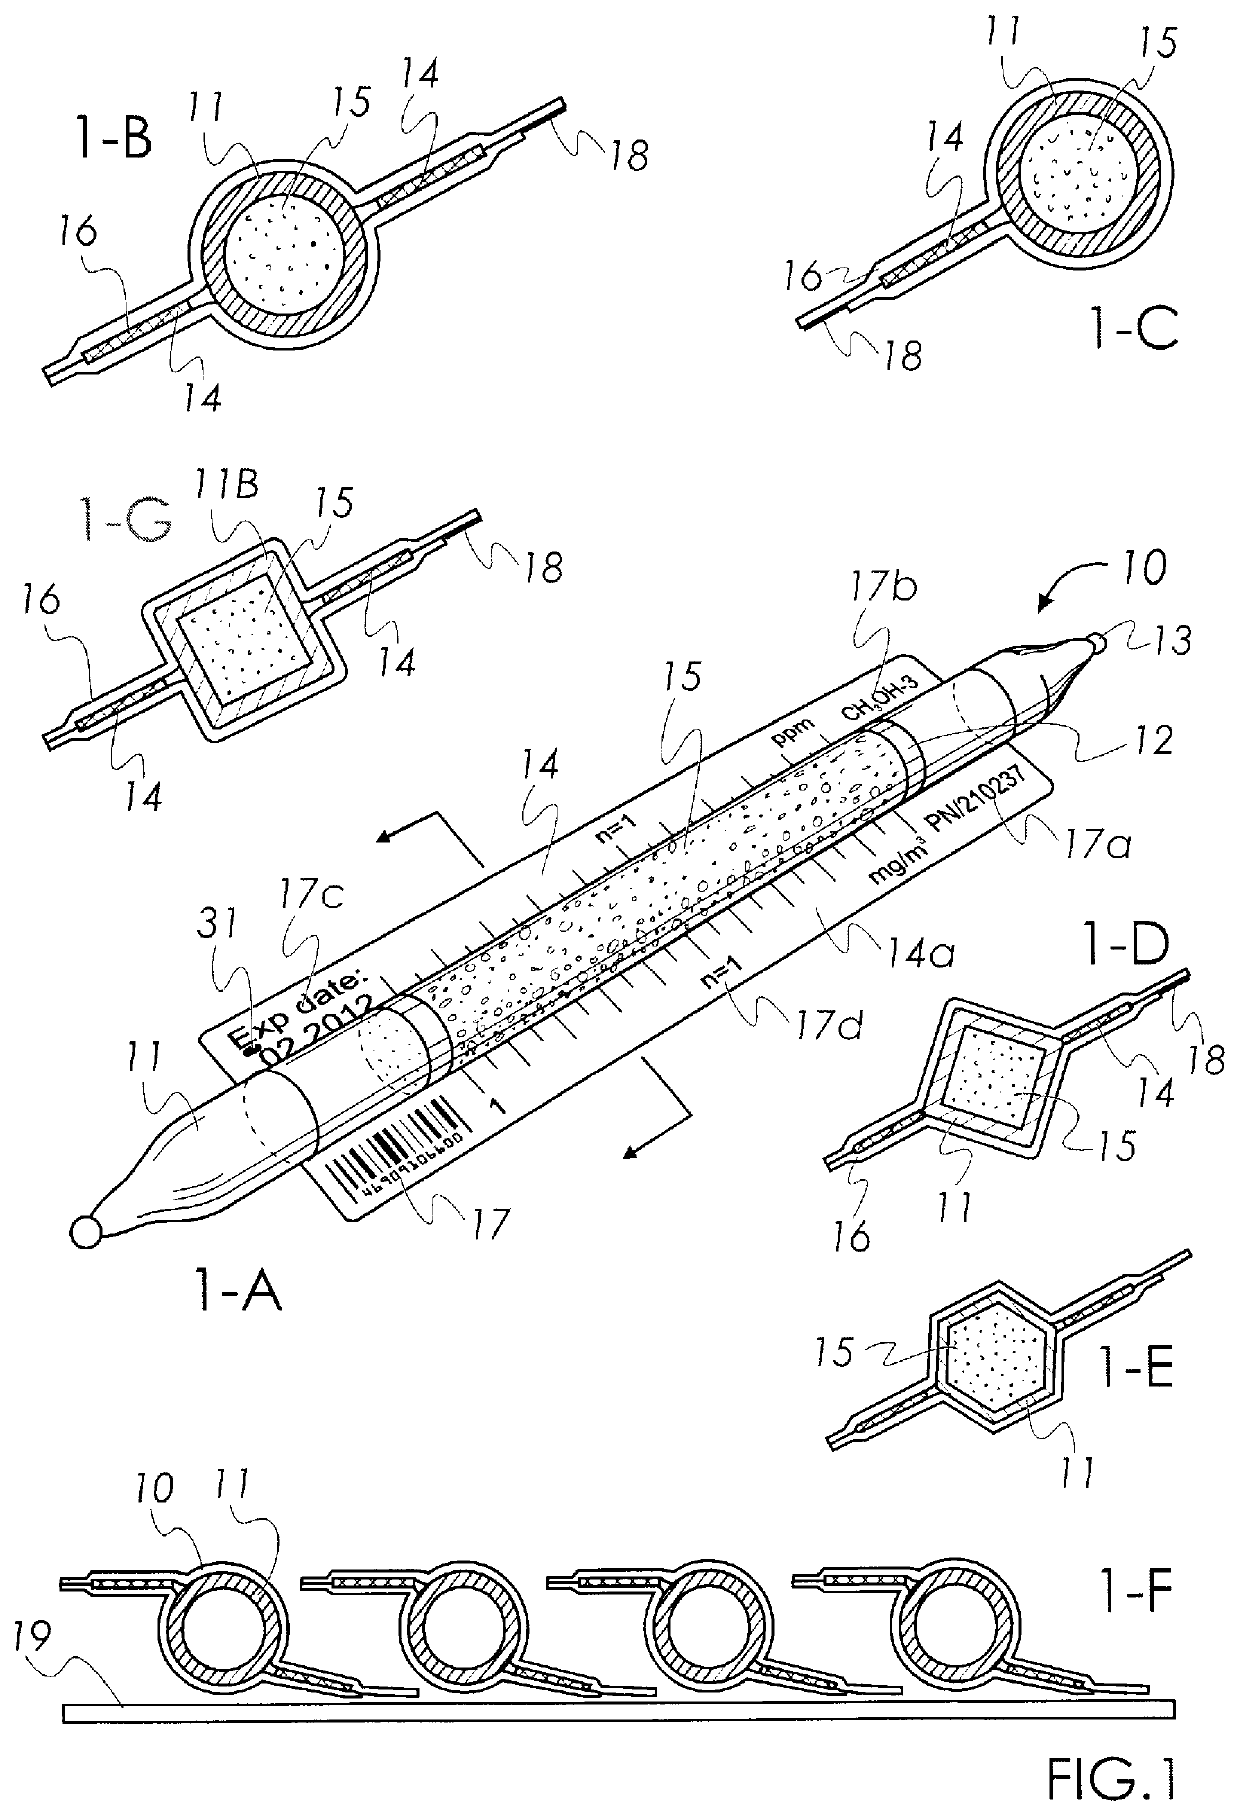 System for Visual and Electronic Reading of Colorimetric Tubes